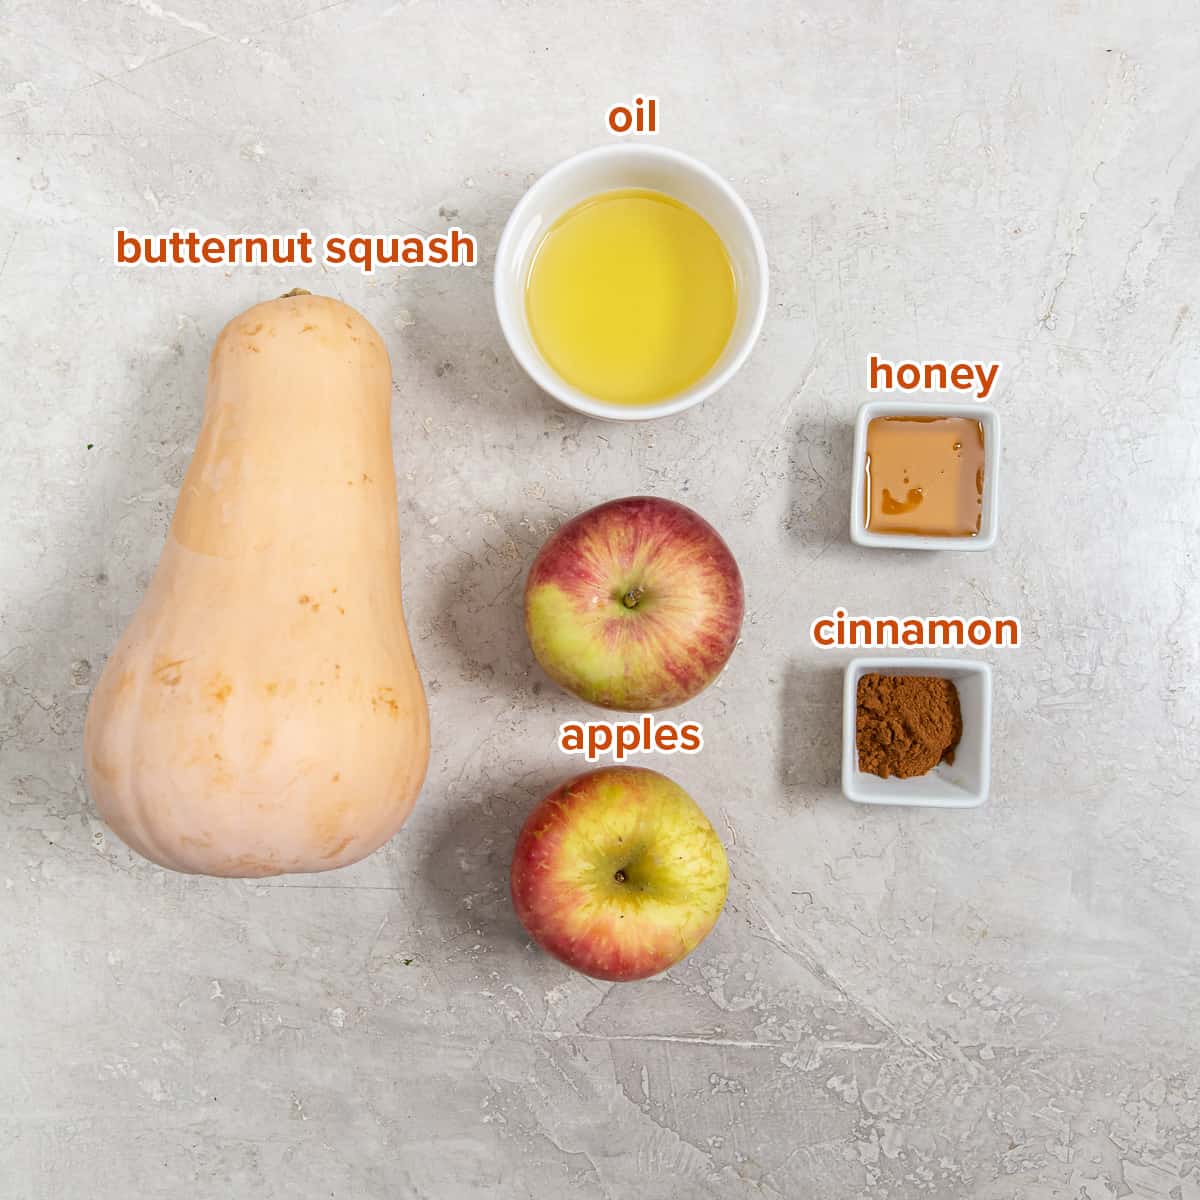 A butternut squash, two apples and oil, cinnamon, and honey in small bowls with text.